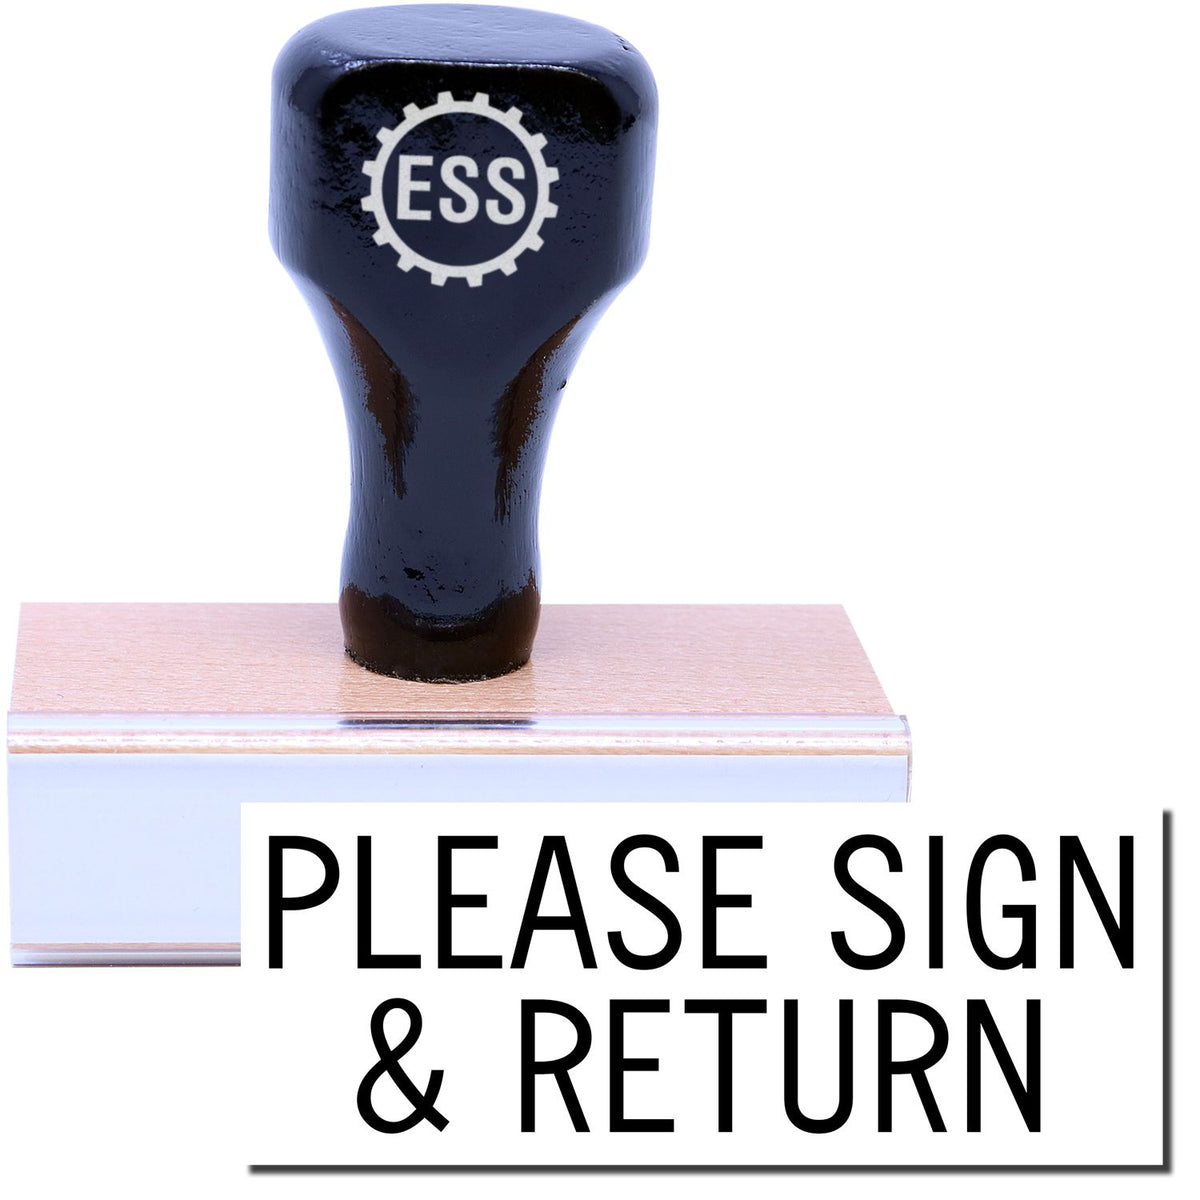 A stock office rubber stamp with a stamped image showing how the text &quot;PLEASE SIGN &amp; RETURN&quot; in a large font is displayed after stamping.